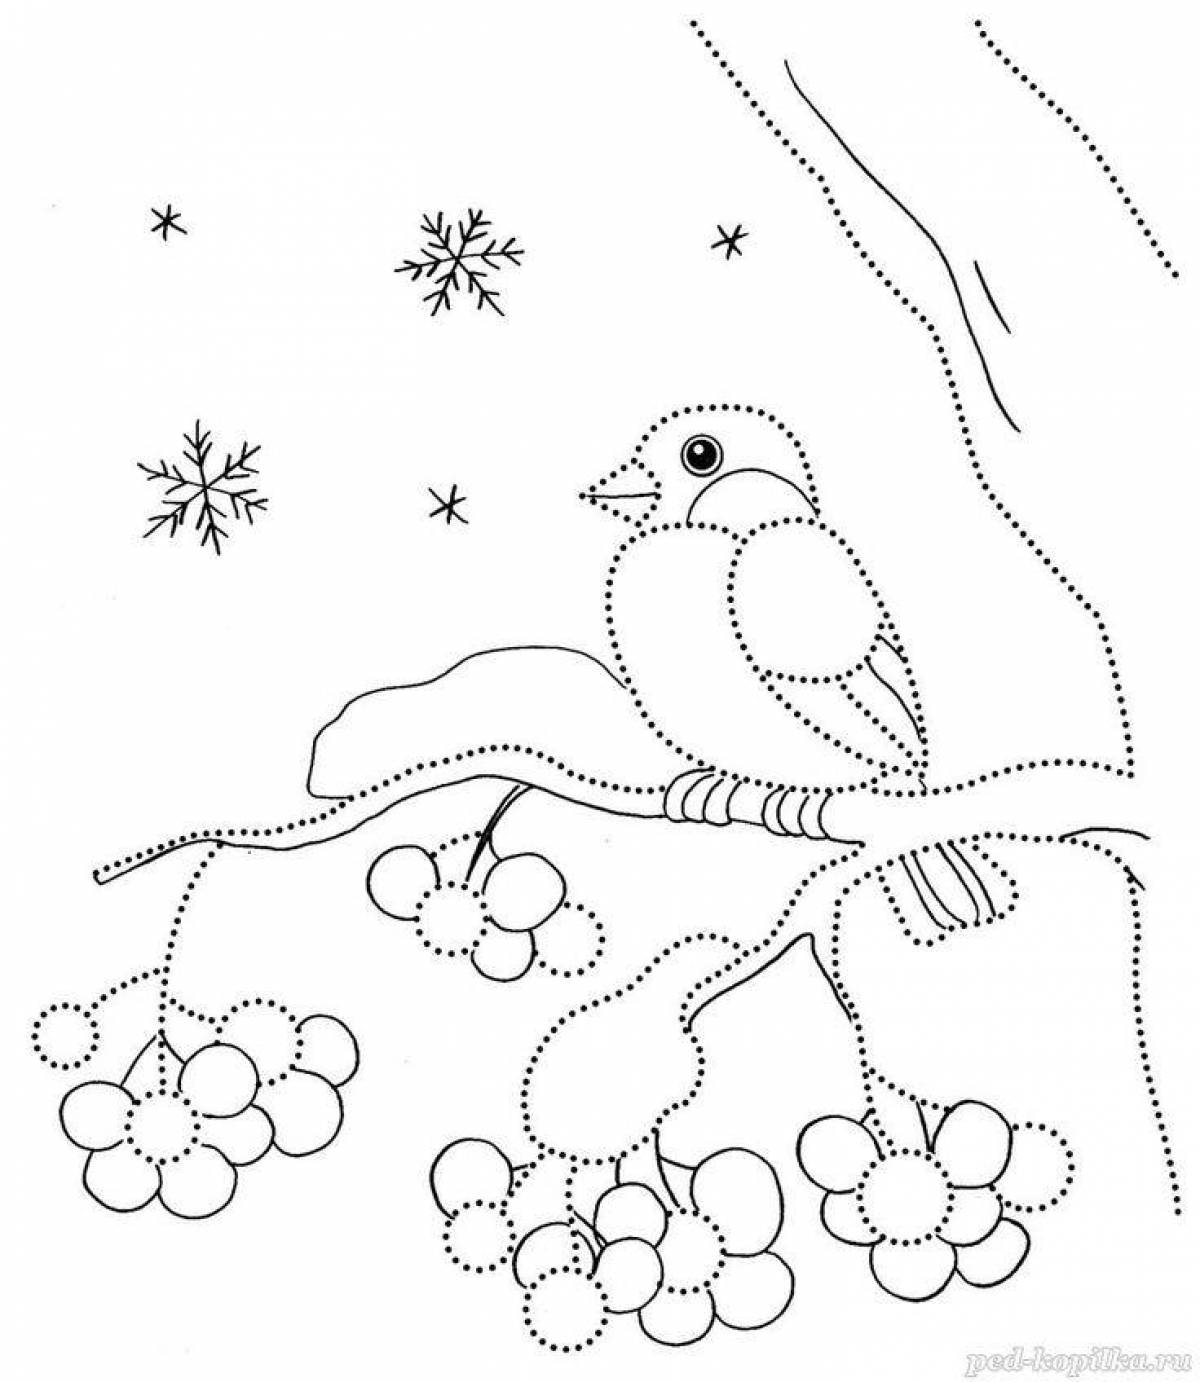 Coloring book cute wintering birds for children 4-5 years old